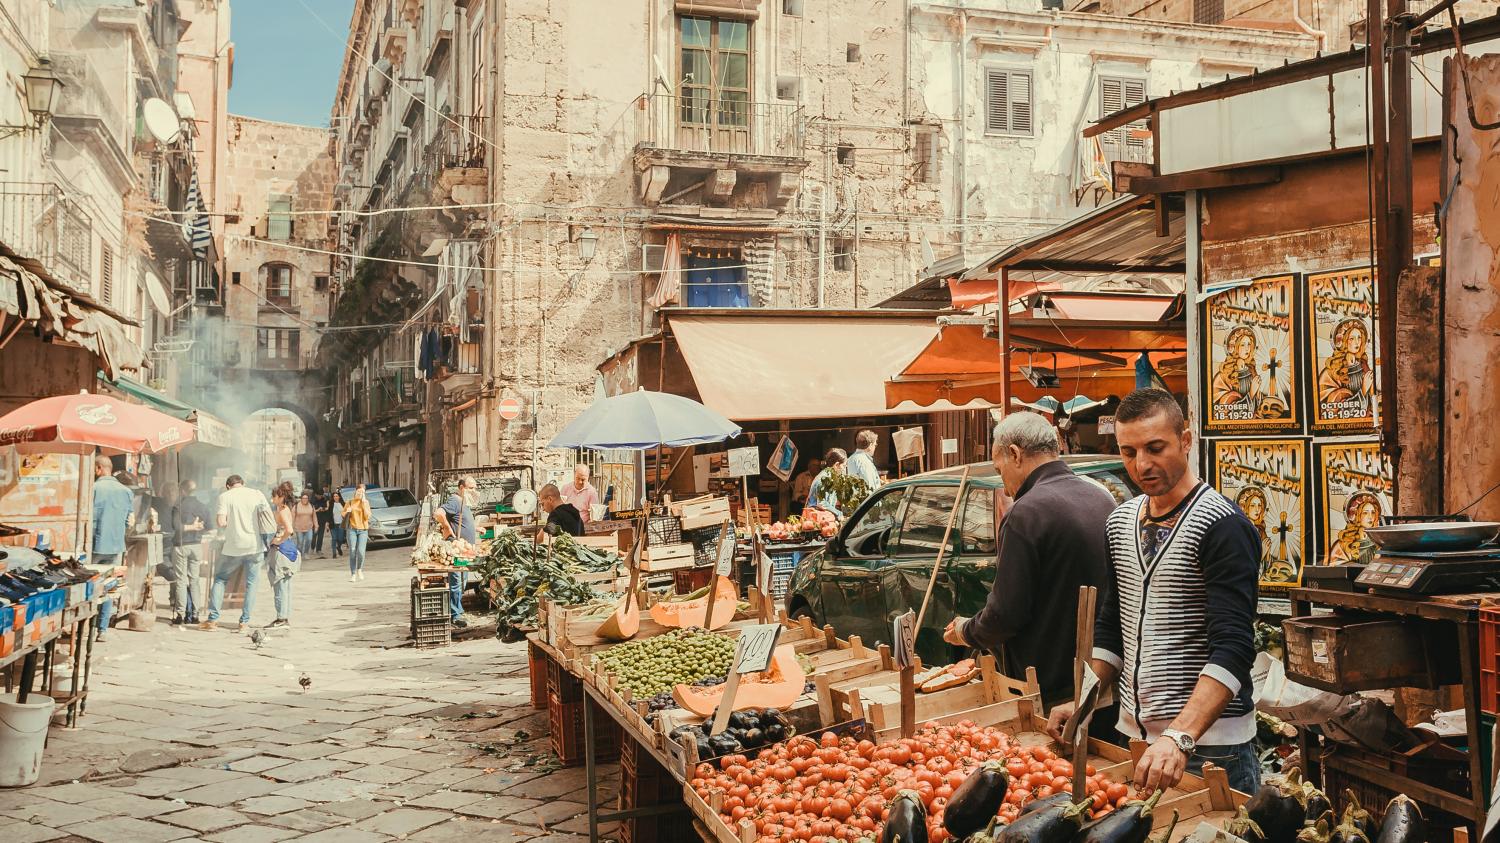 OUR FOOD SOLDIERS TRAVEL SOUTH  TO THE REAL SICILY